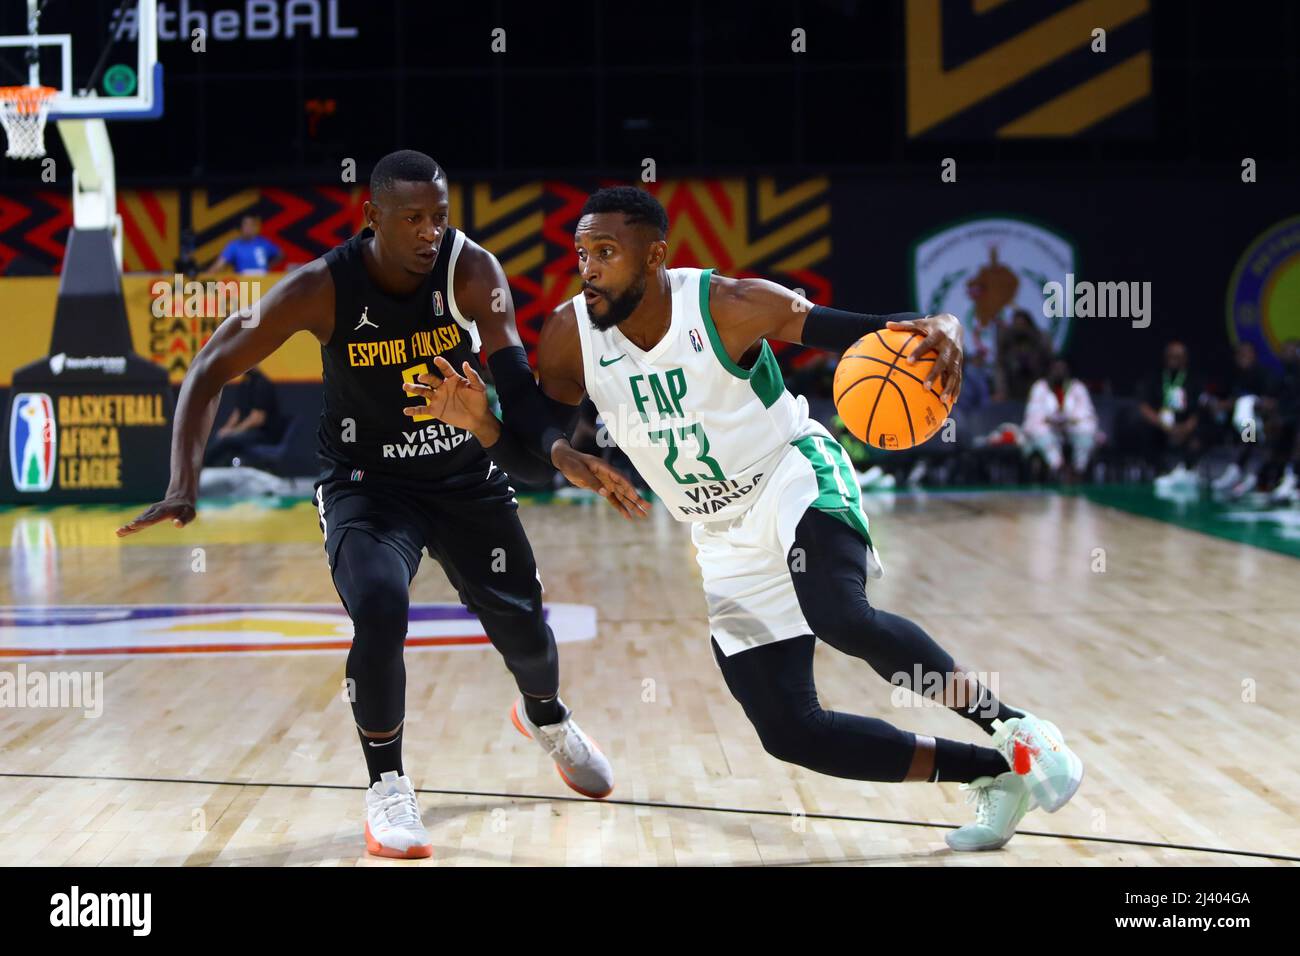 Cairo, Egypt. 10th Apr, 2022. Pierre Cedric Essome (R) of Forces Armees et Police Basketball dribbles the ball during the match between Forces Armees et Police Basketball (FAP) of Cameroon and BC Espoir Fukash of Congo at the 2022 Basketball Africa League (BAL) in Cairo, Egypt, on April 10, 2022. Credit: Ahmed Gomaa/Xinhua/Alamy Live News Stock Photo